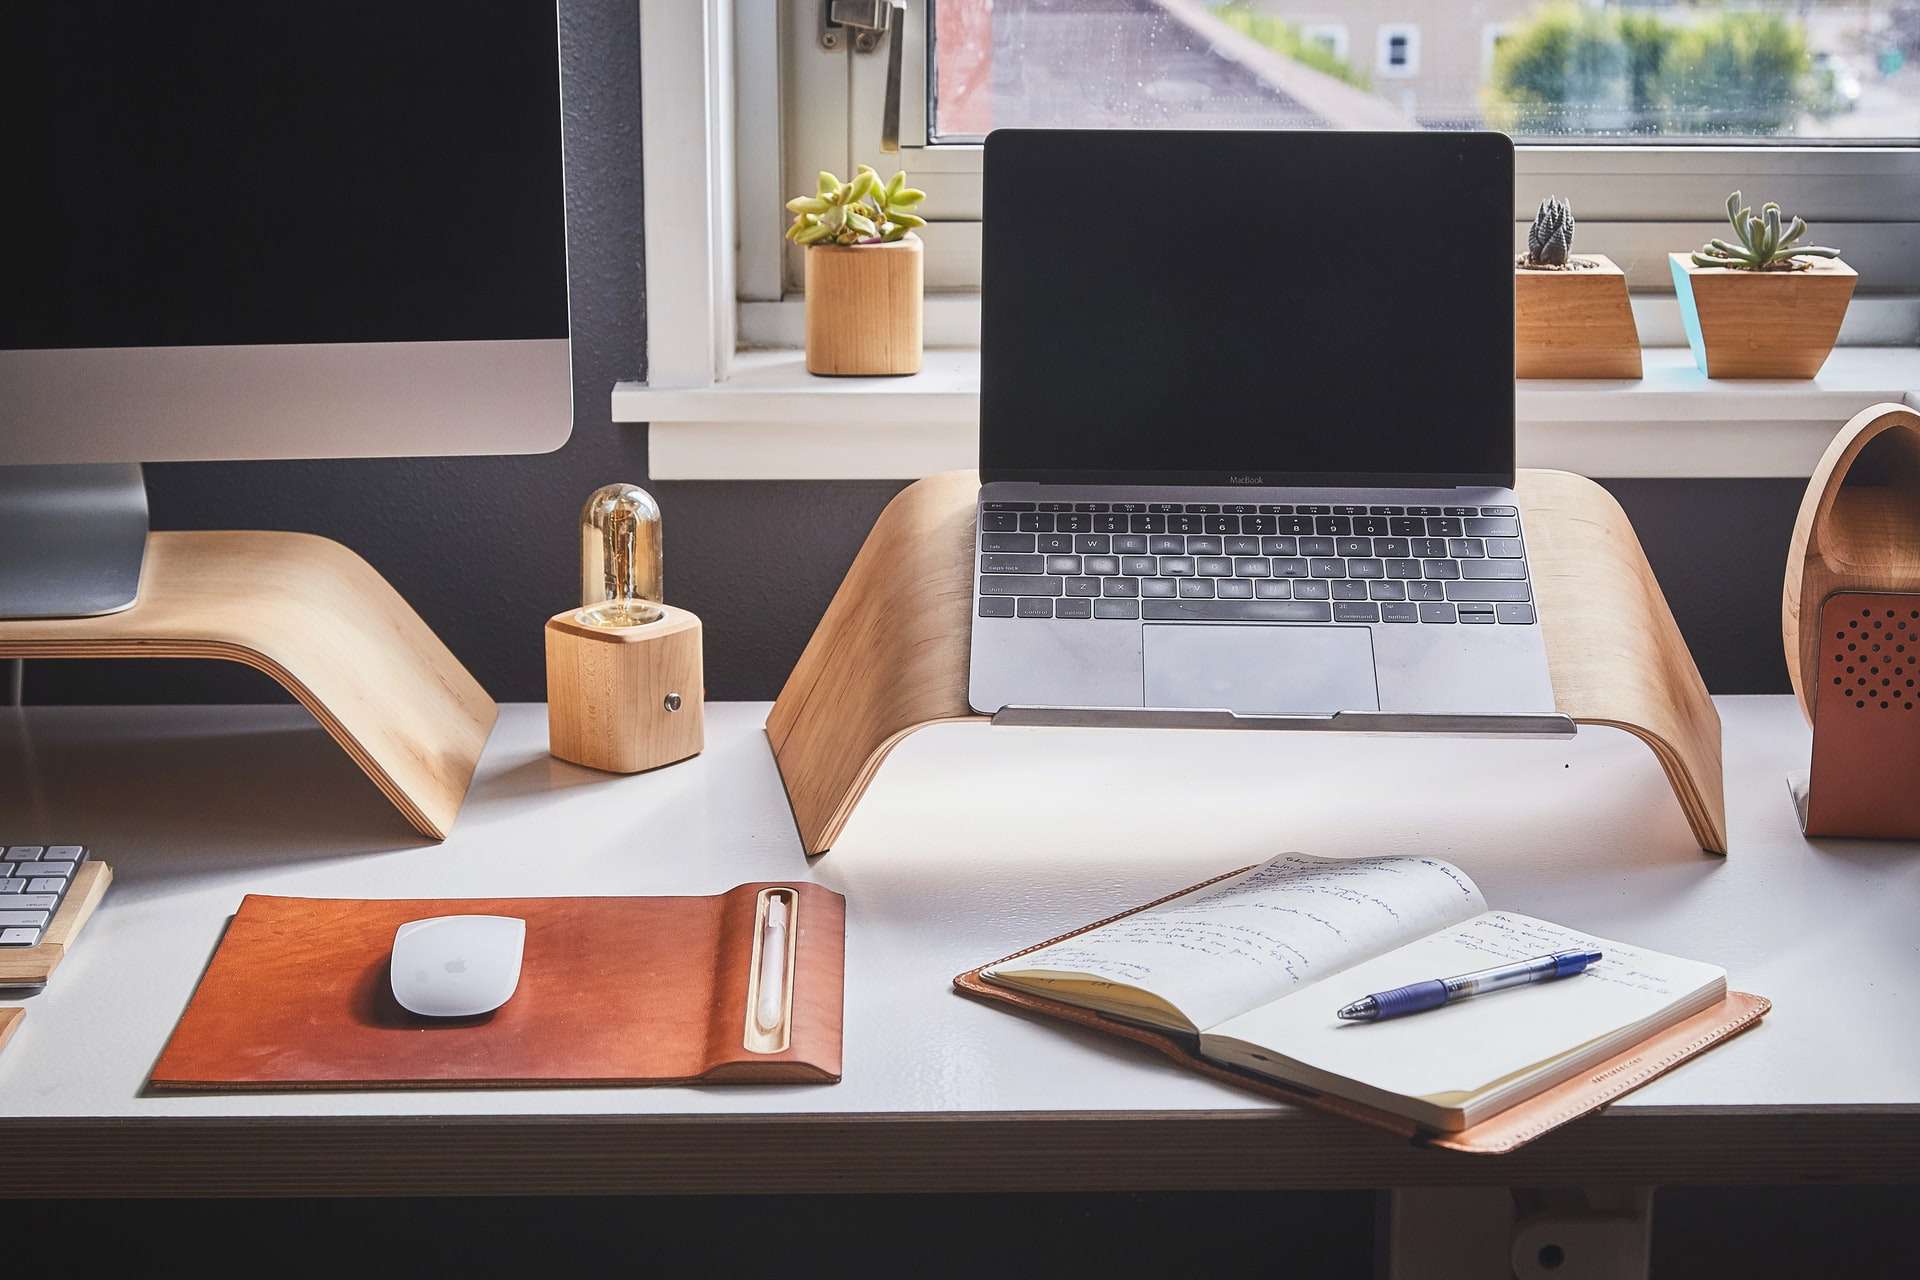 How to spruce up your work desk?